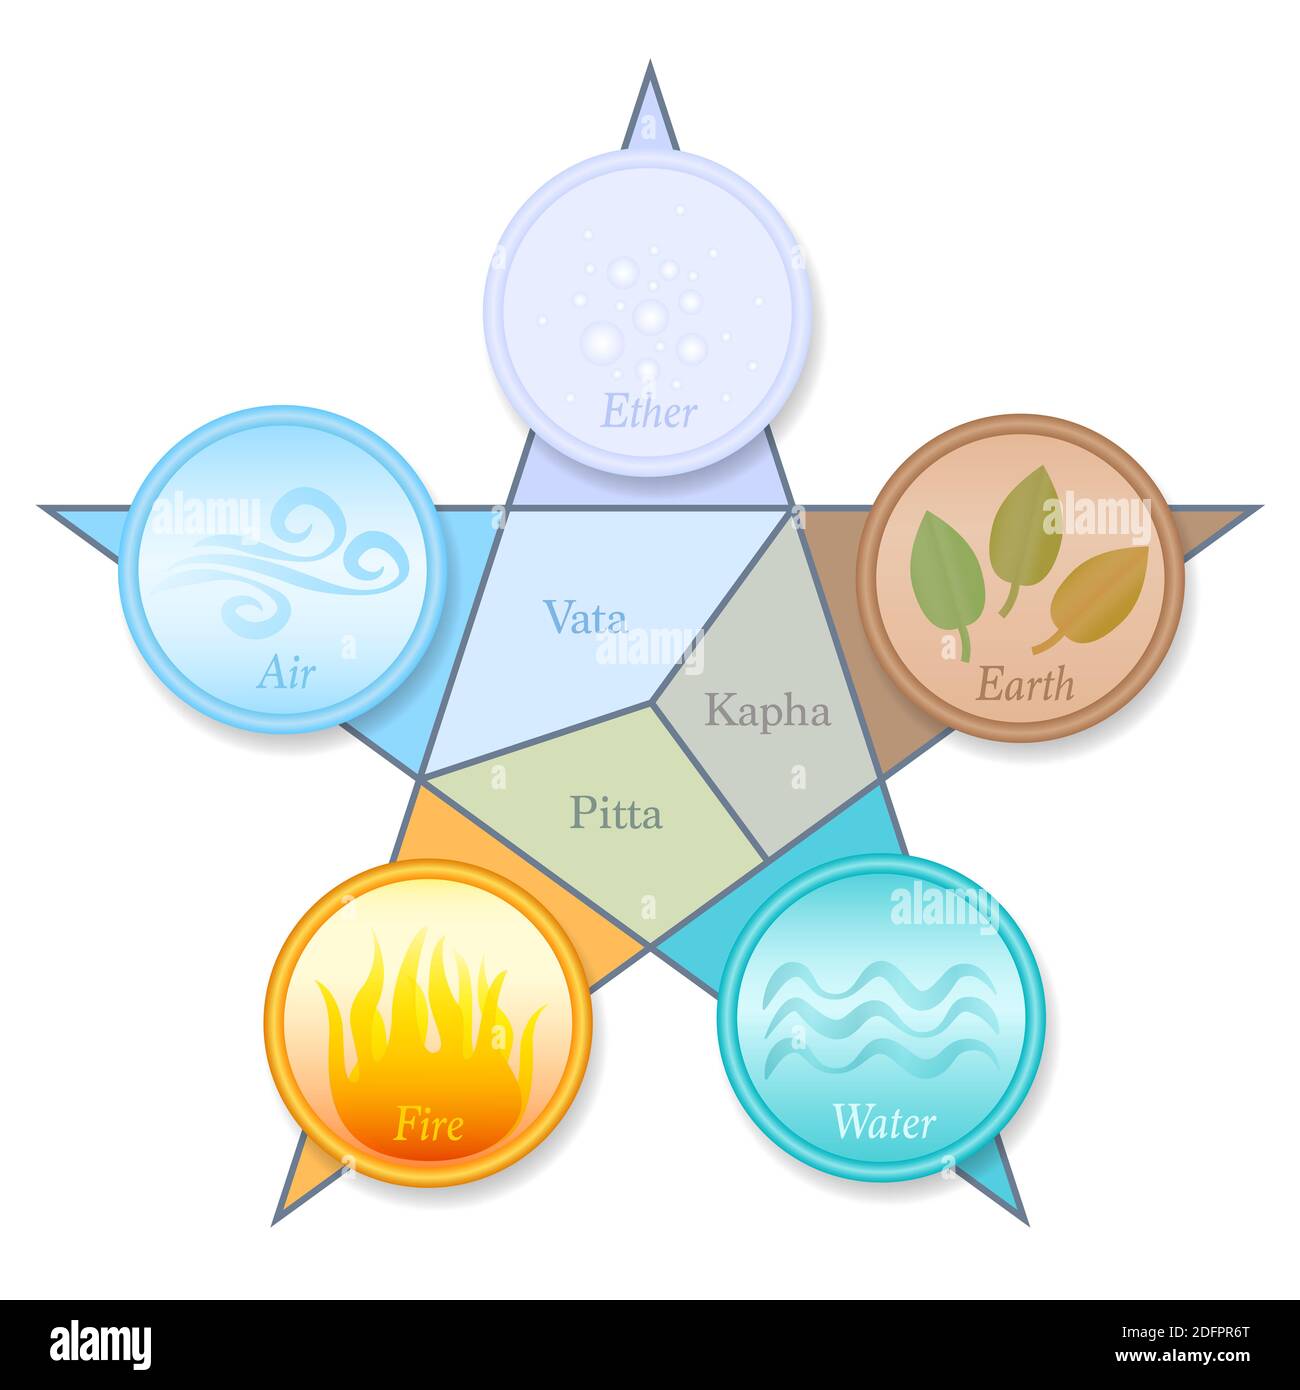 Ayurveda doshas and elements pentagram. Vata, Pitta, Kapha - Ether, Air, Fire, Water and Earth. Ayurvedic symbols with names and position in a star. Stock Photo